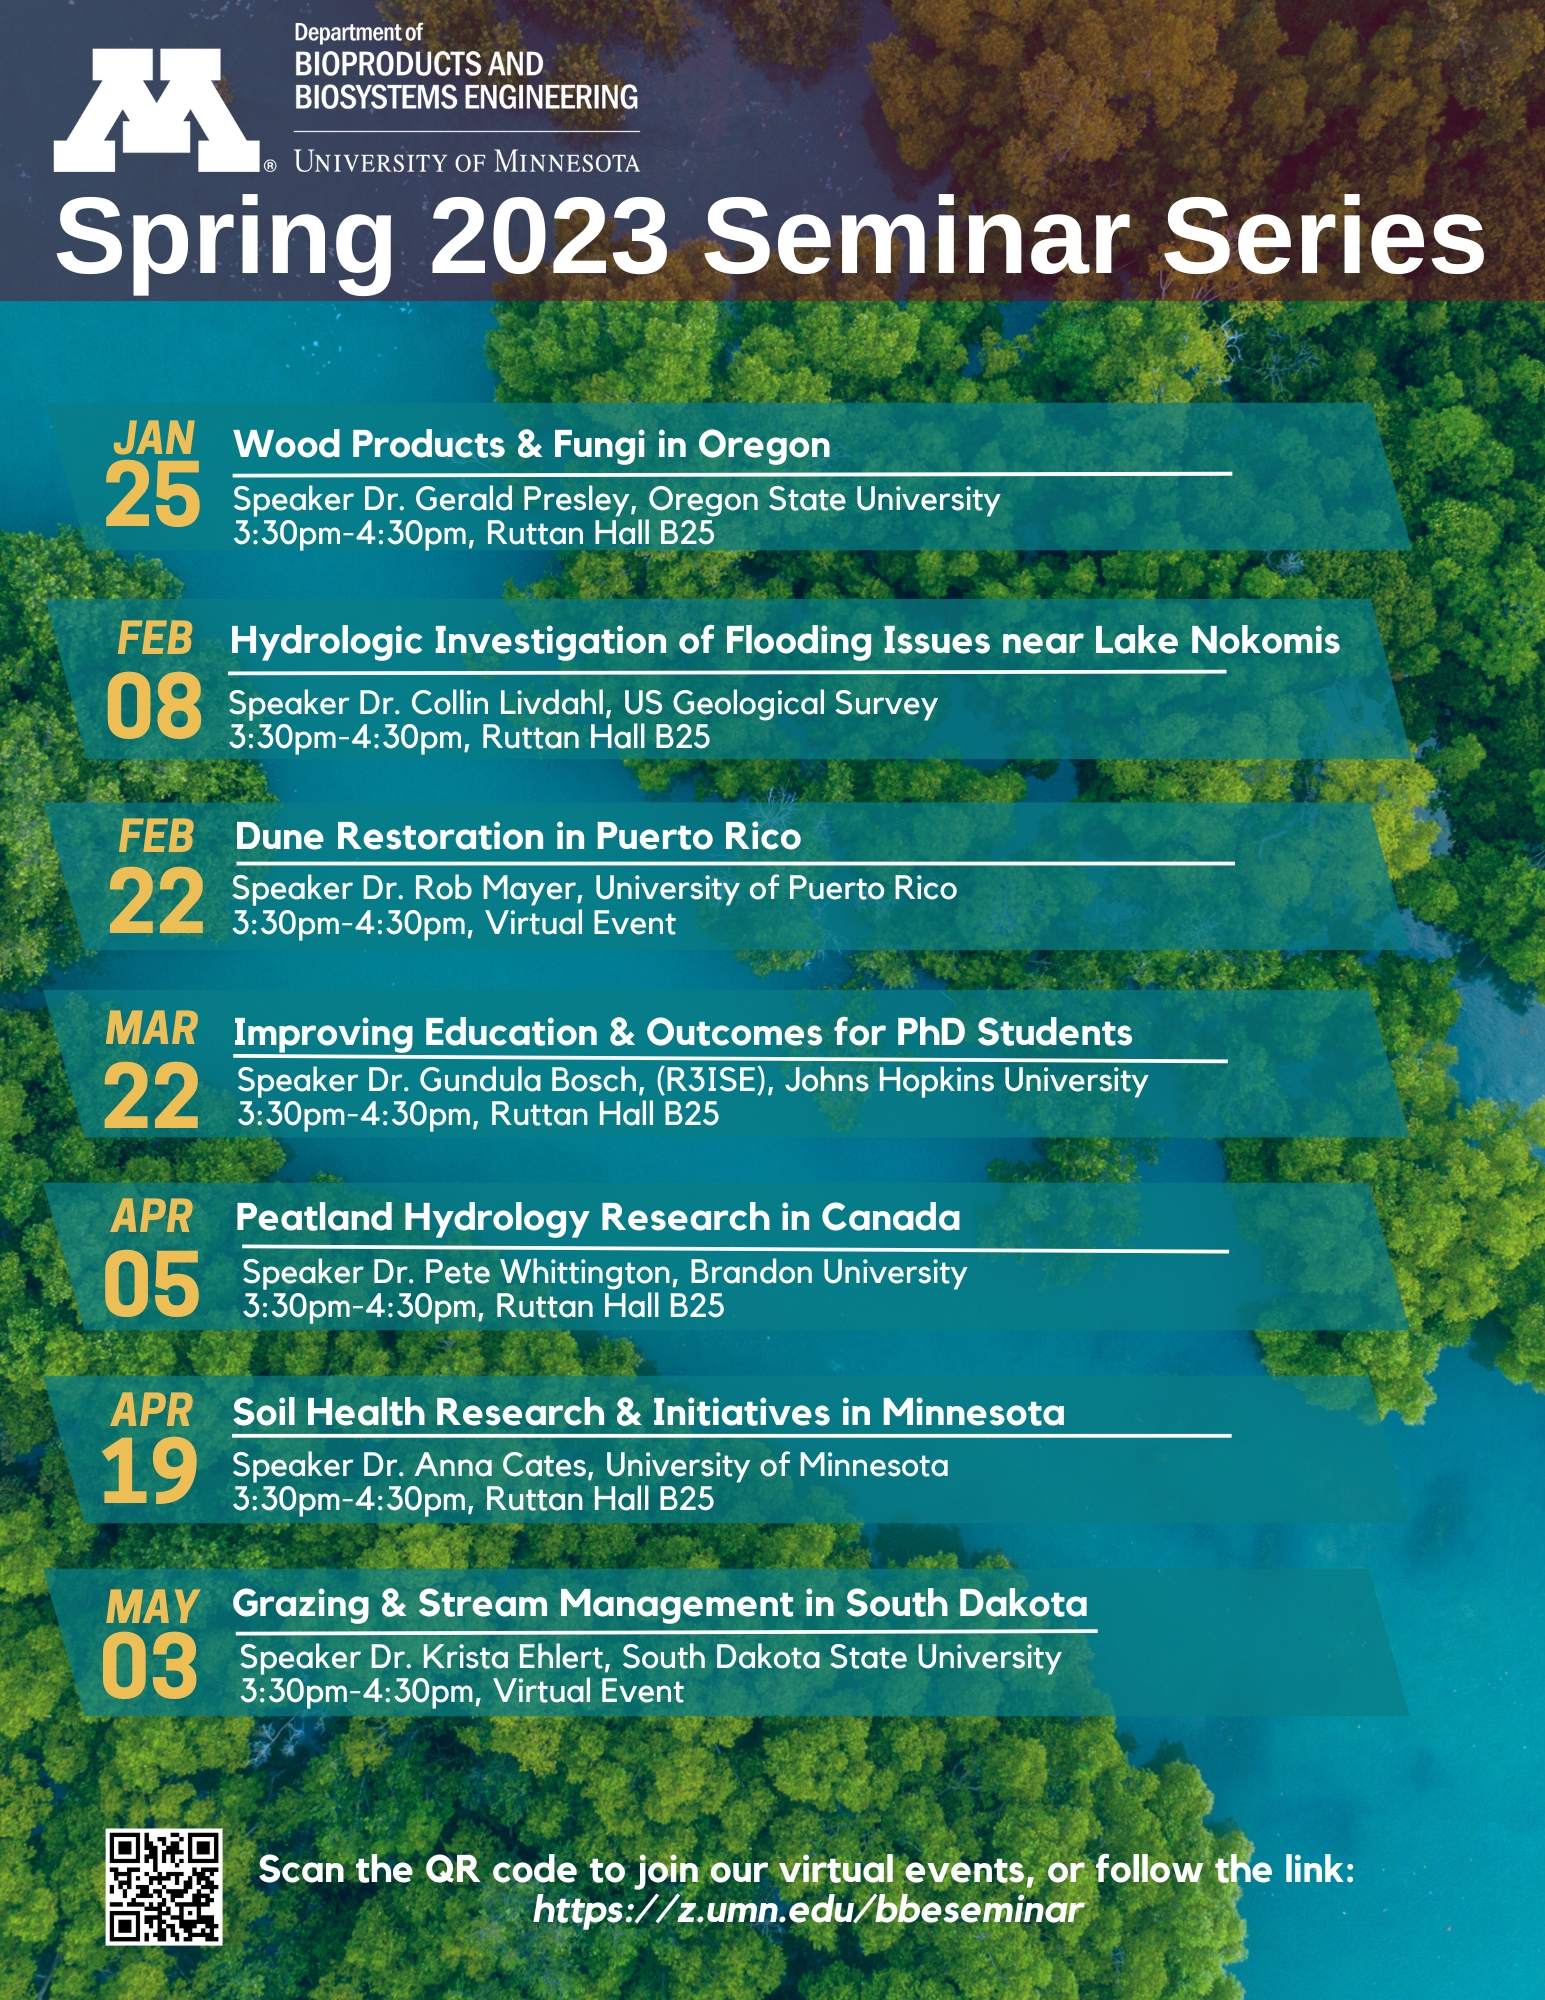 A flyer with the full spring schedule for seminar speakers overlaid on an aerial view of a river.